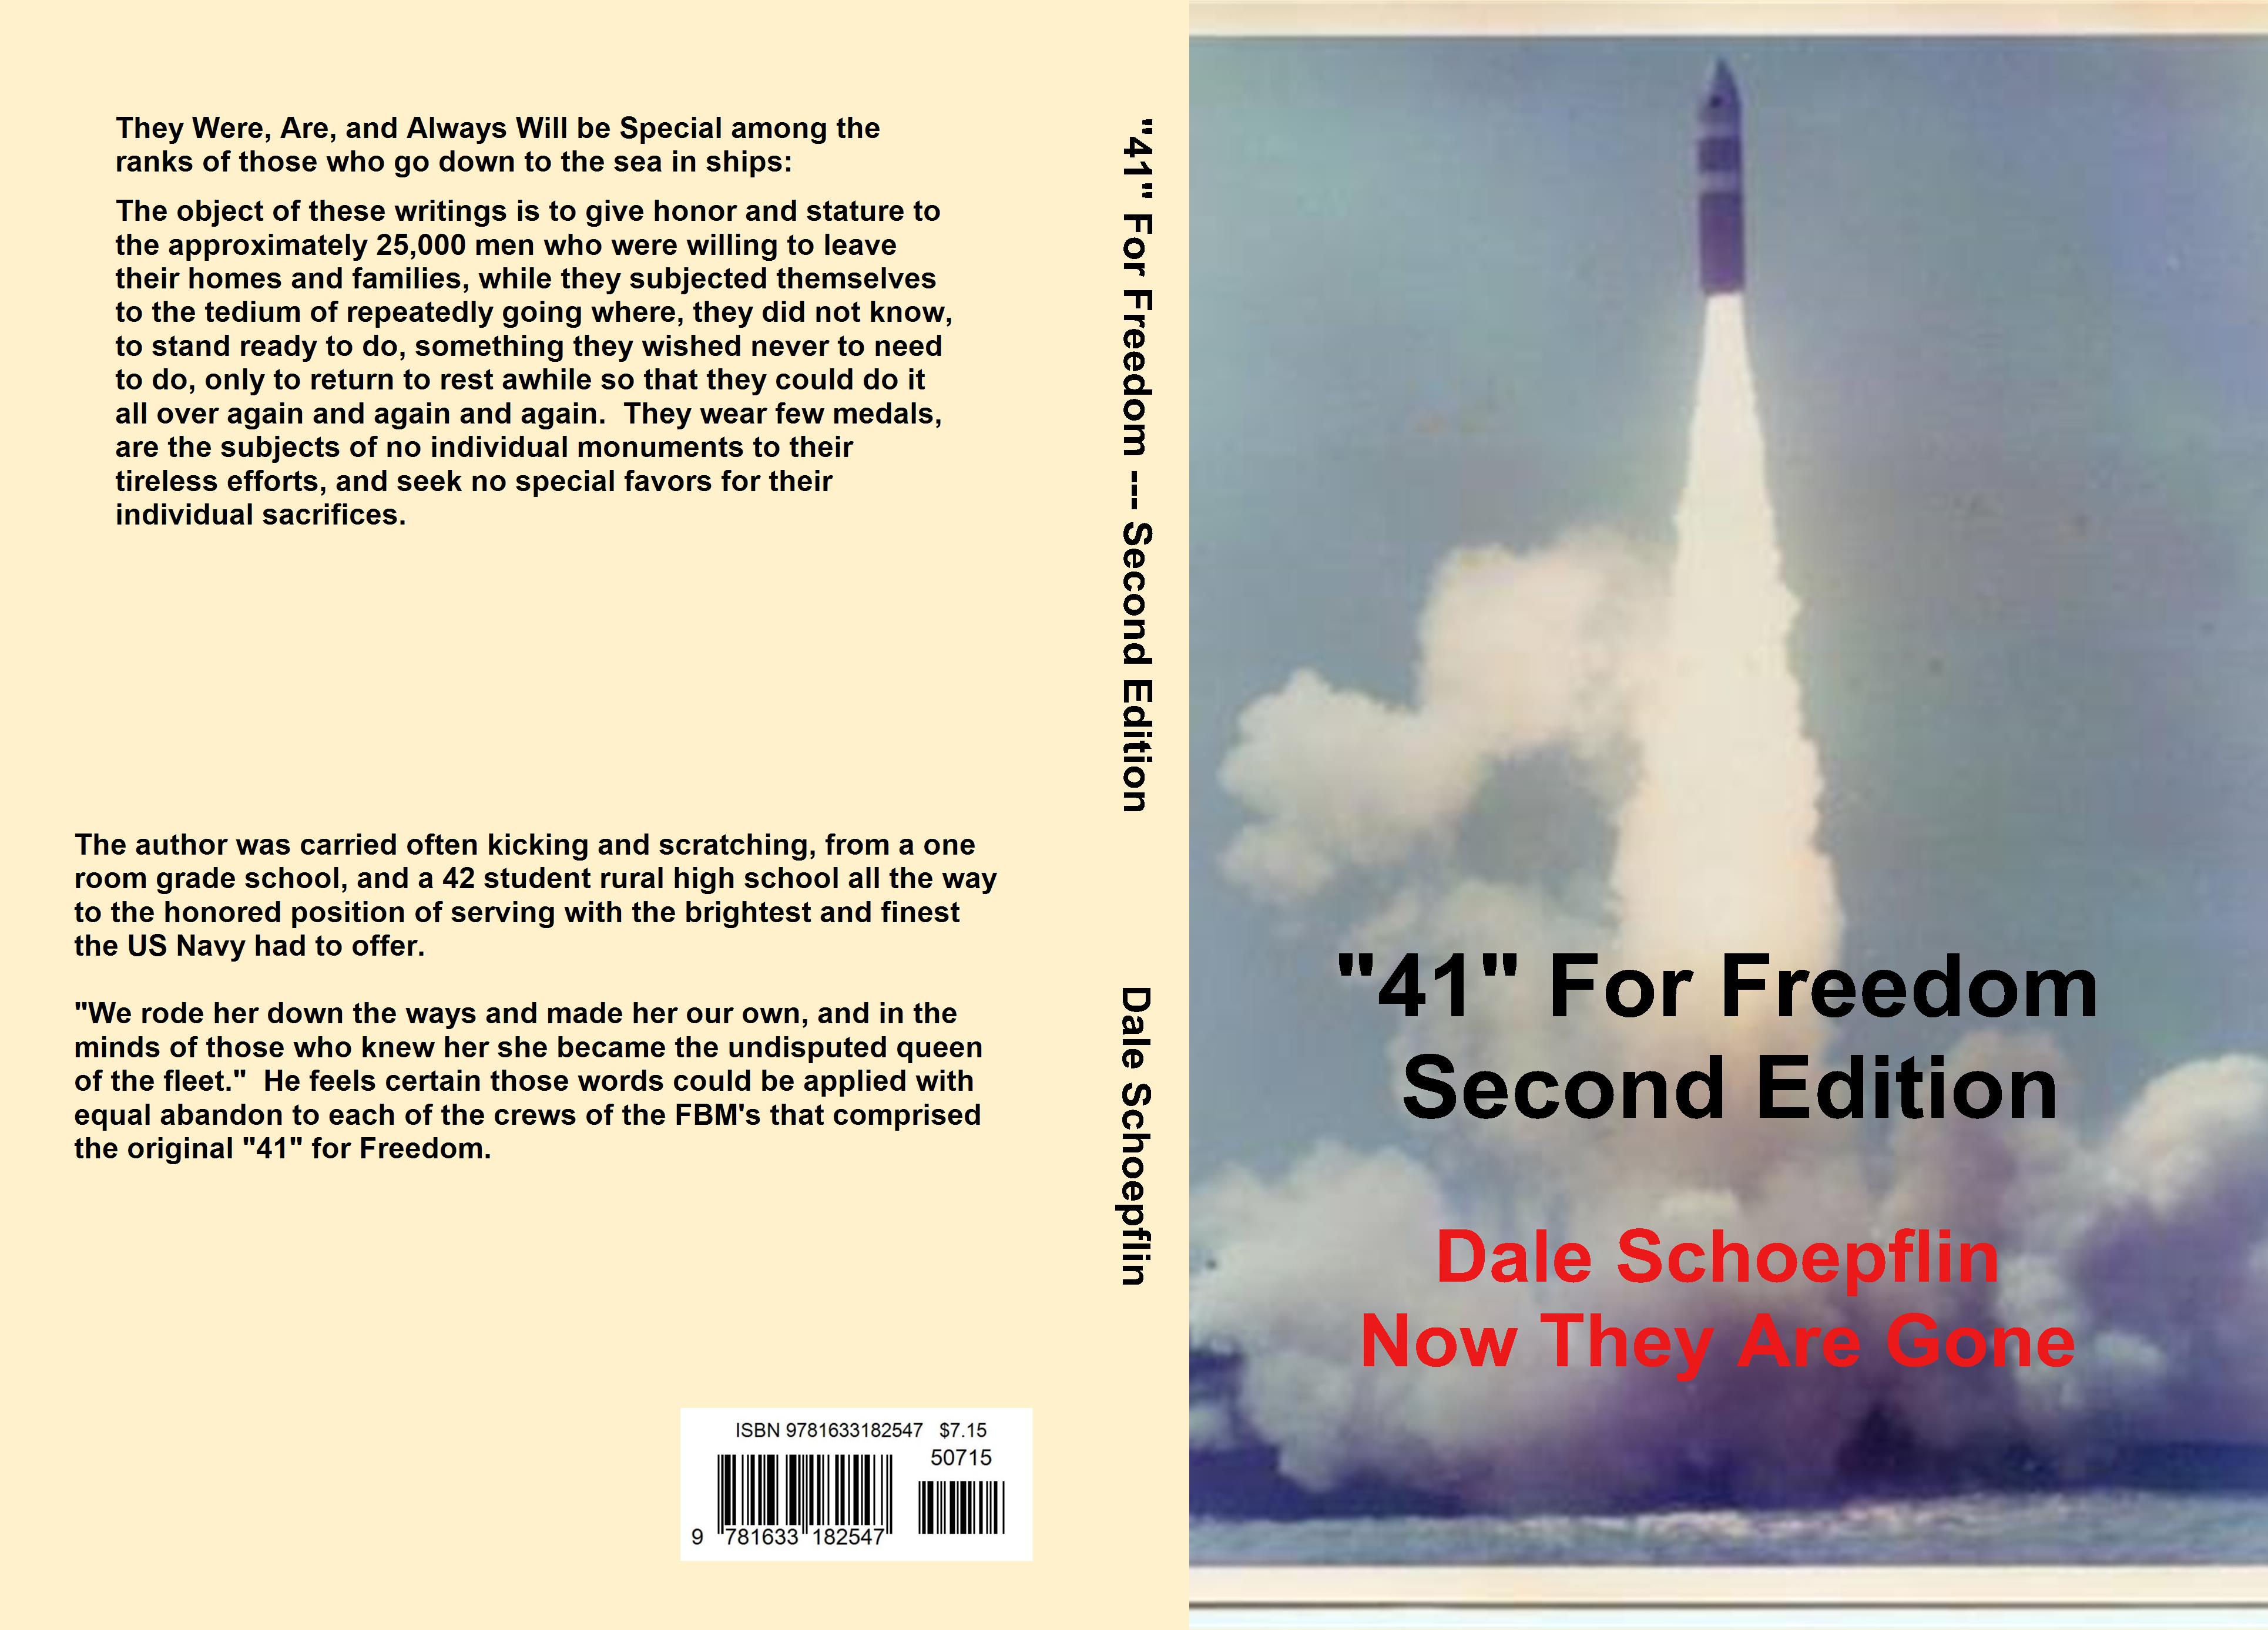 "41" For Freedom Second Edition cover image